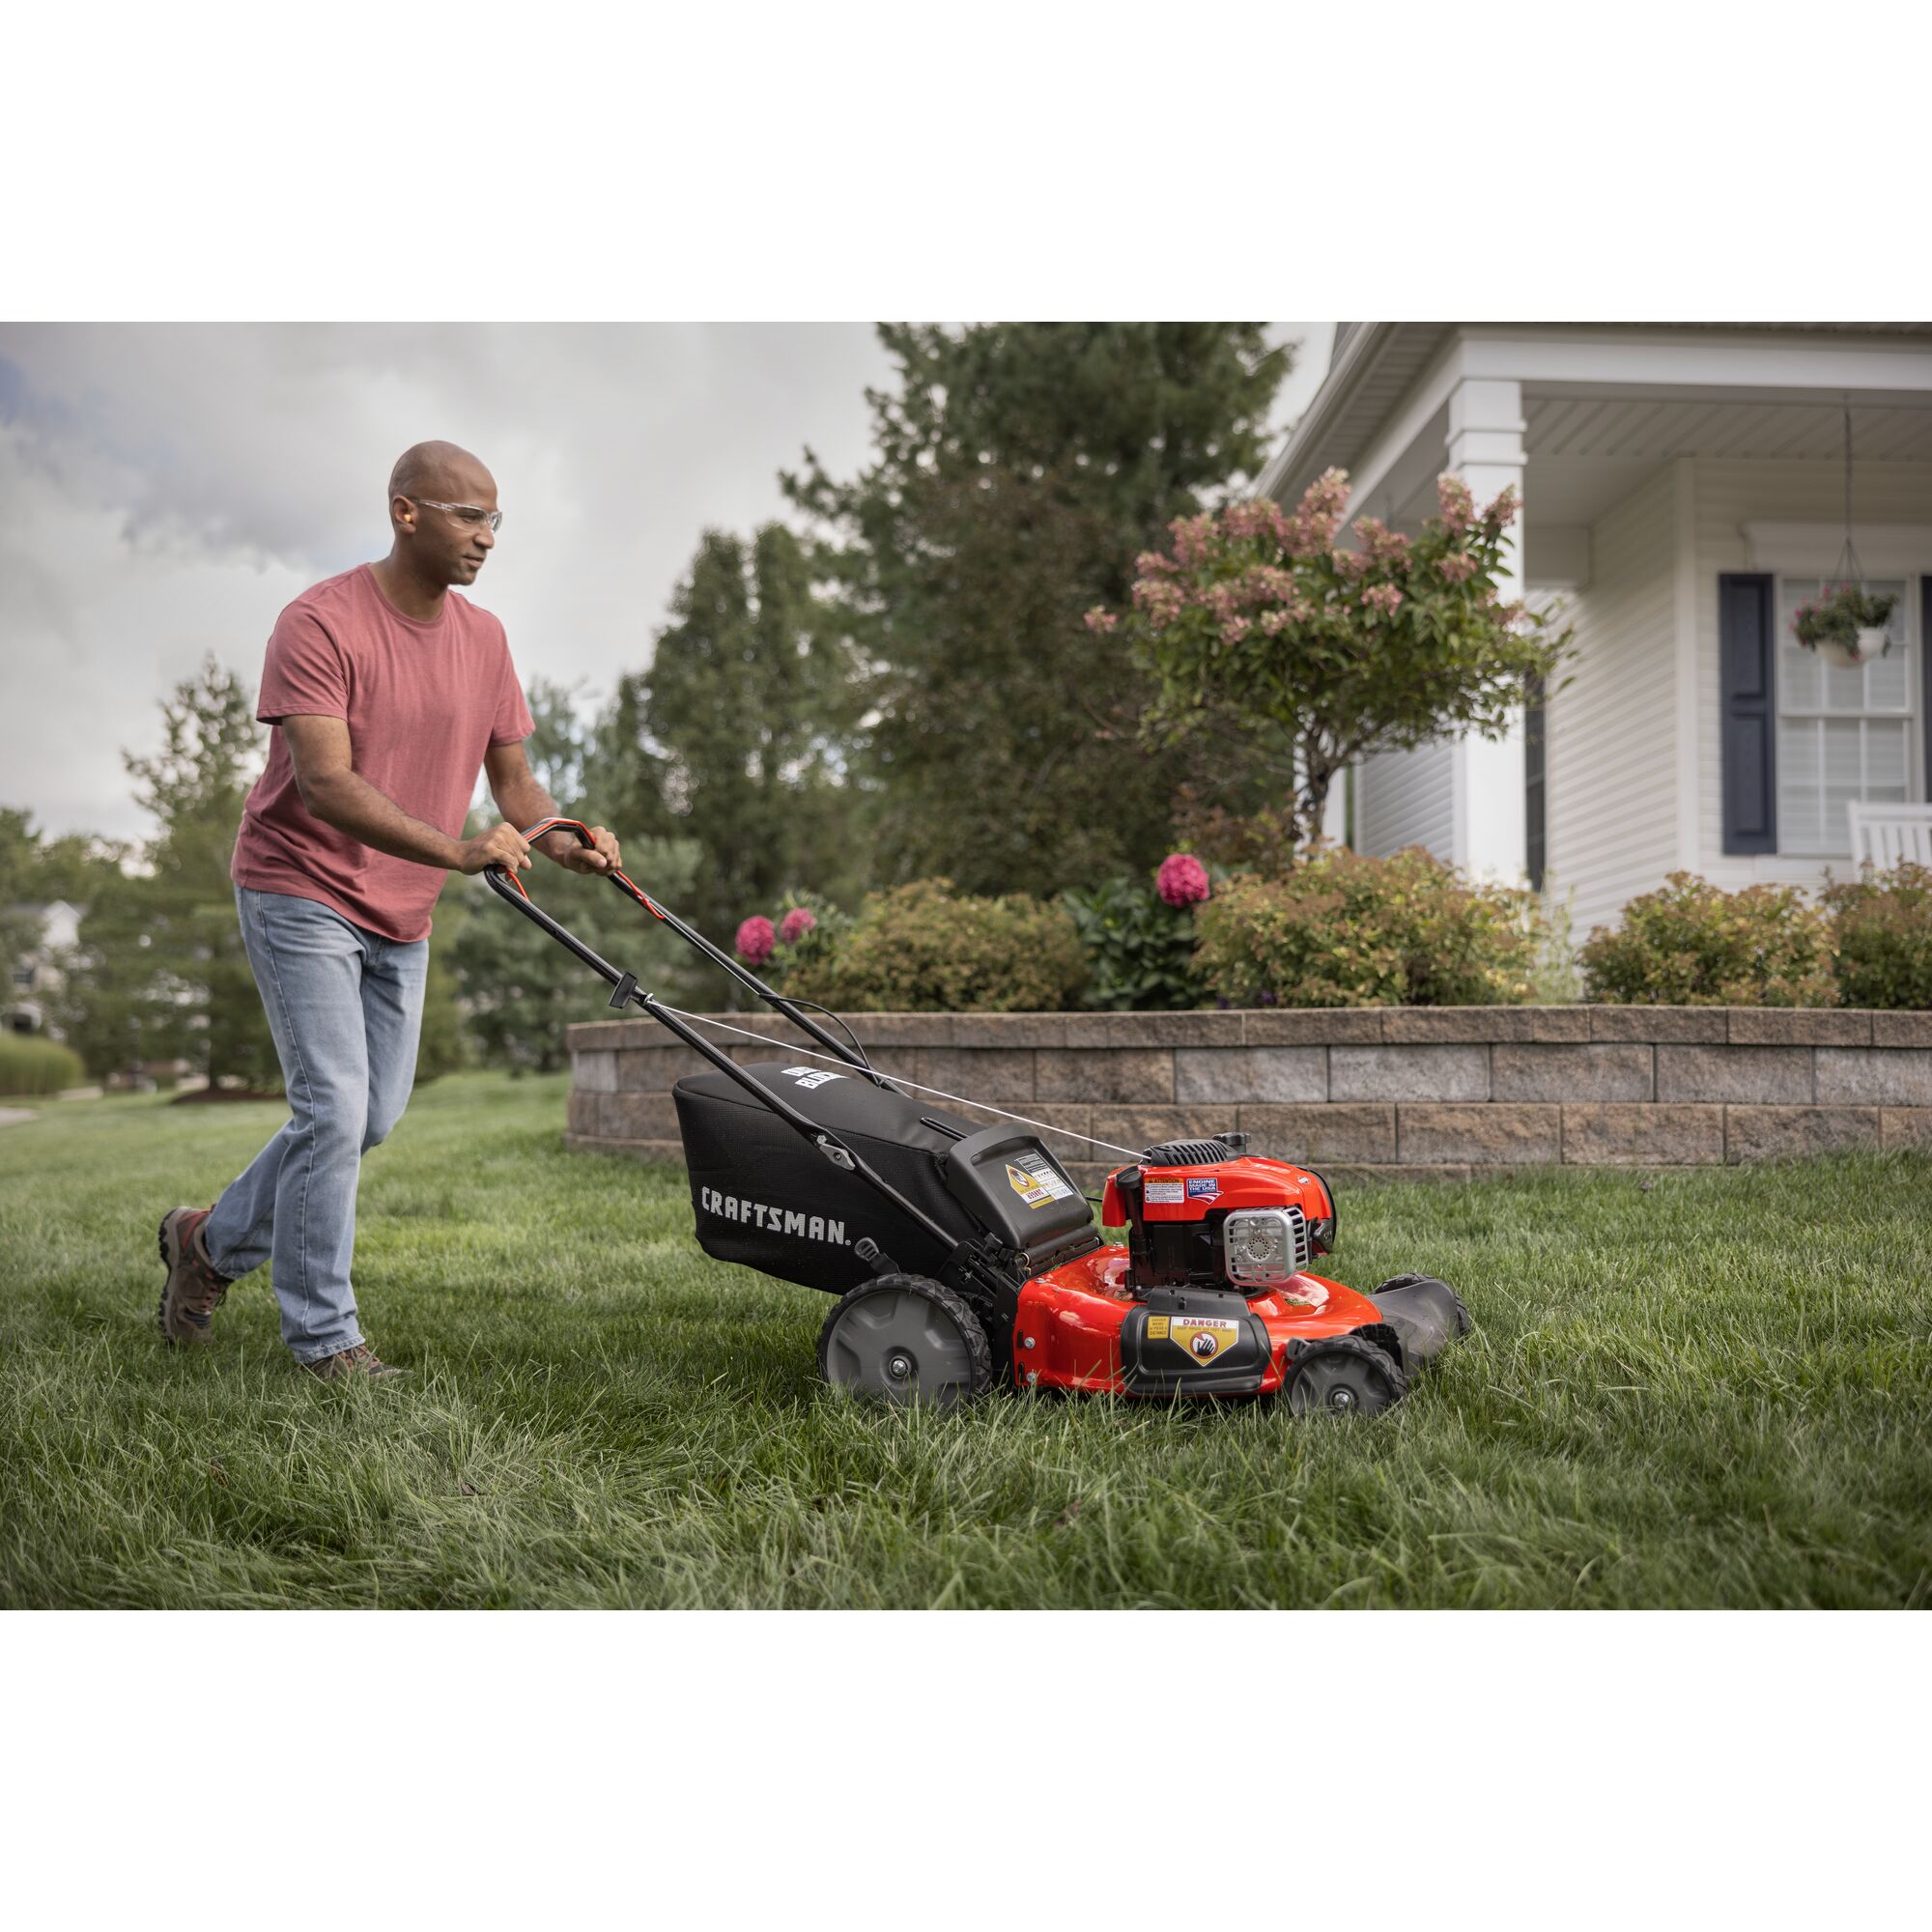 CRAFTSMAN 21-in 150cc Gas Push Mower mowing yard in front of house